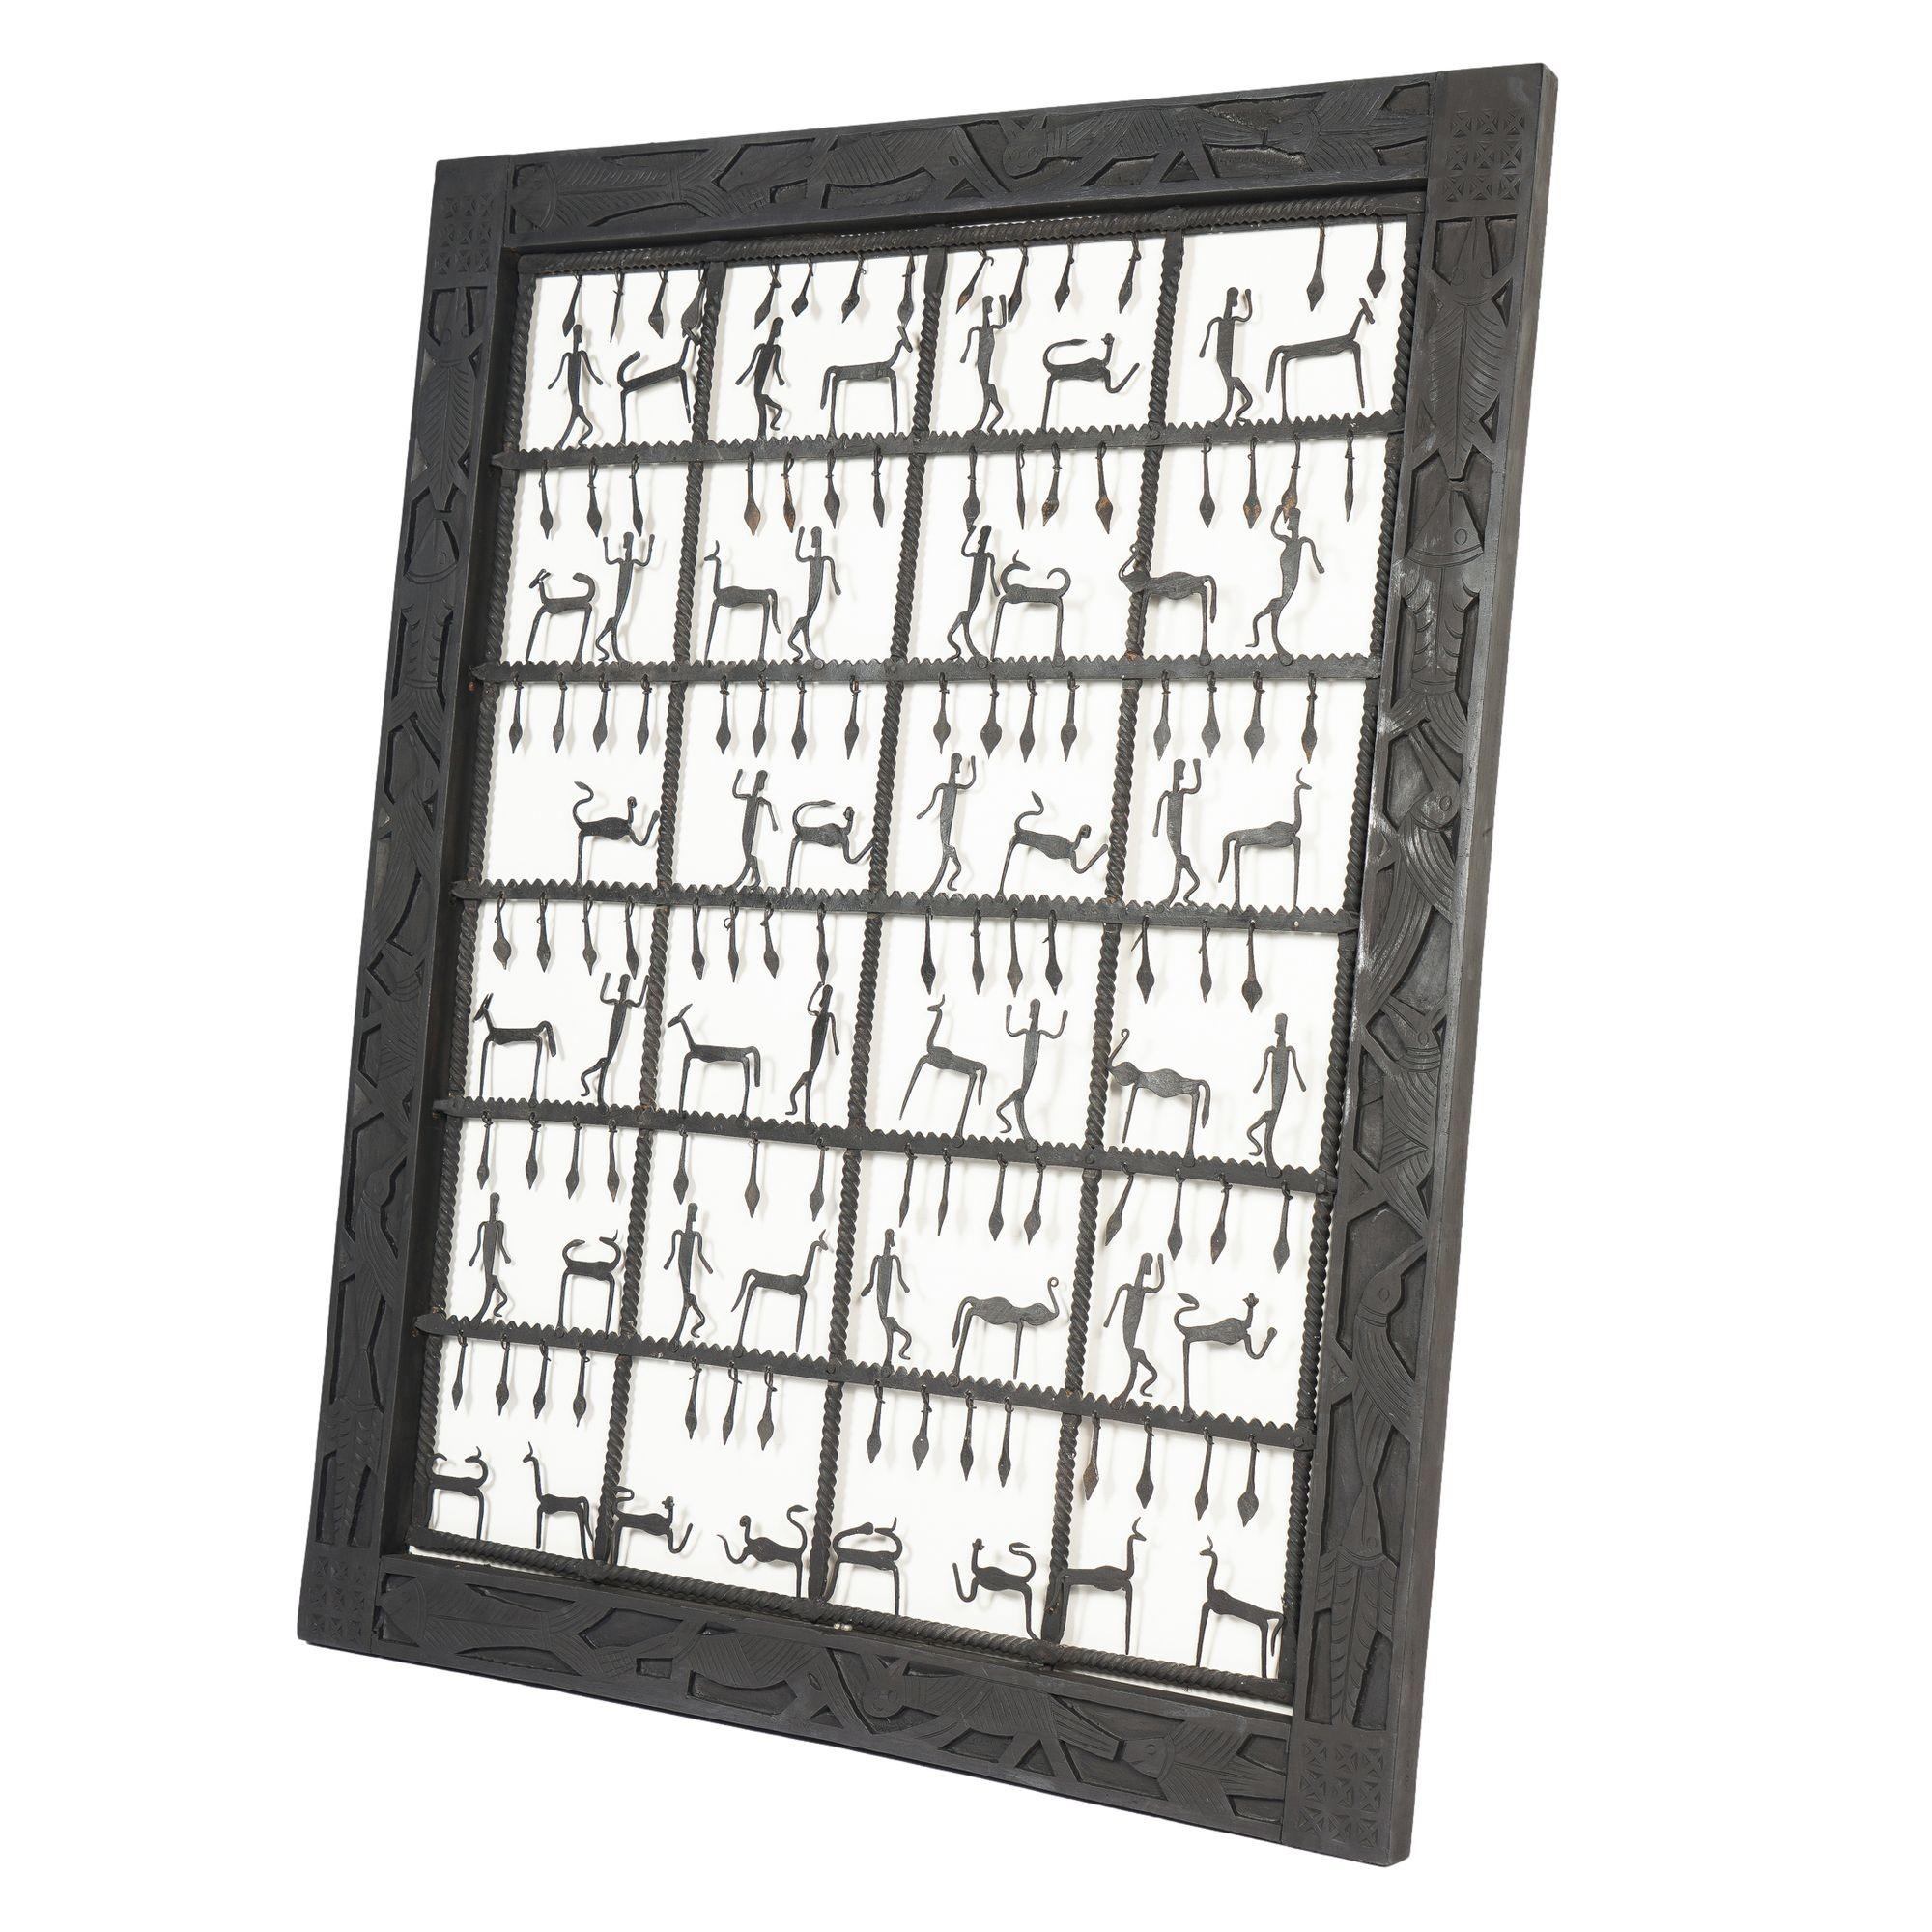 Dogon tribal hand forged iron rope twist grill with hand forged silhouette figures within a grid of 24 squares. The work is framed in its original shallow carved & painted hardwood frame. The frame is carved with fish, birds, and reptiles, all